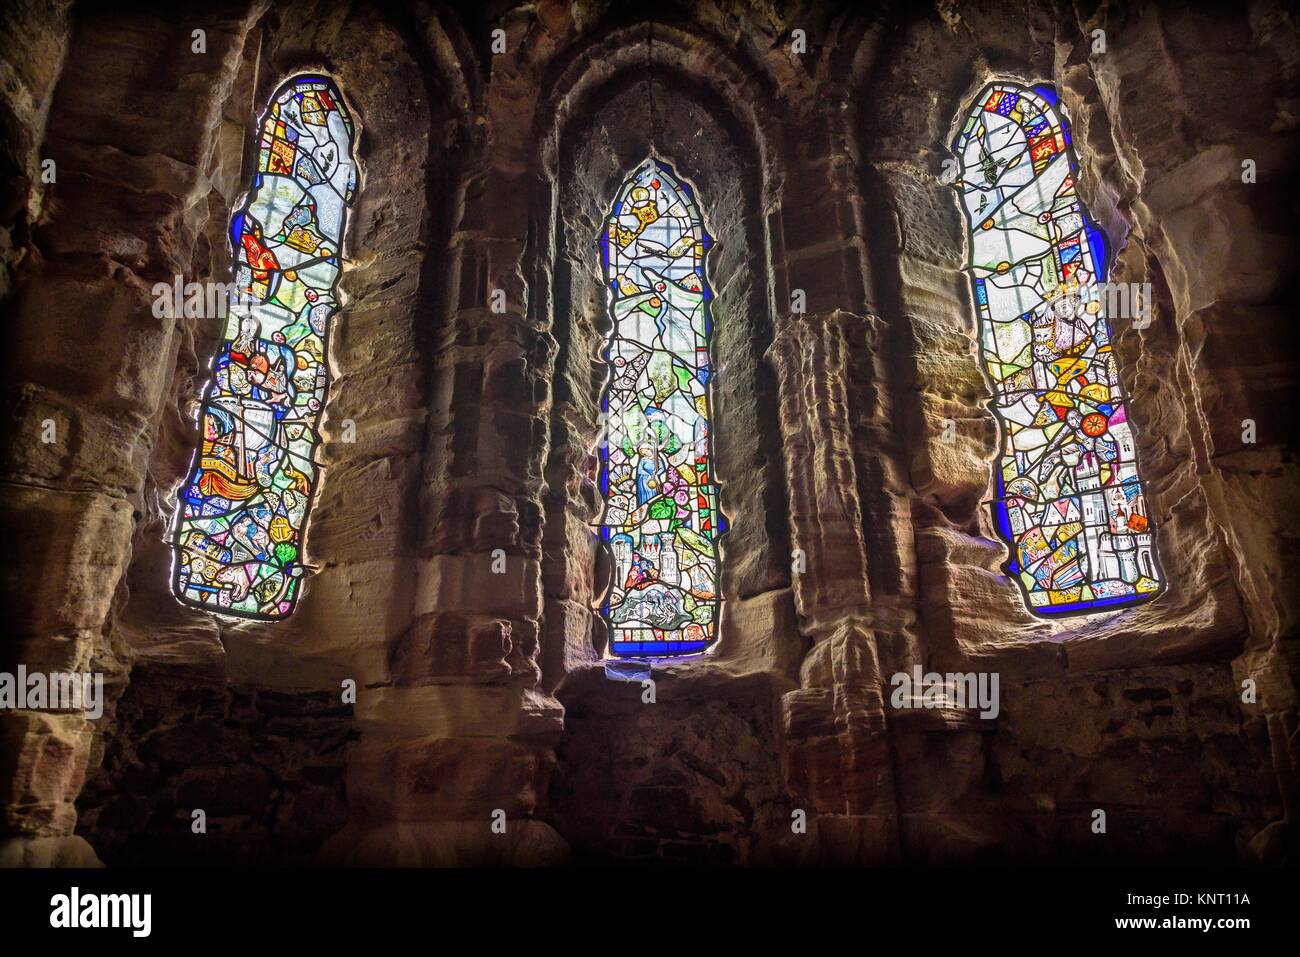 Stained glass windows inside The Royal Chapel of Conwy castle, Wales. Made by made by Linda Norris and Rachel Phillips. Stock Photo